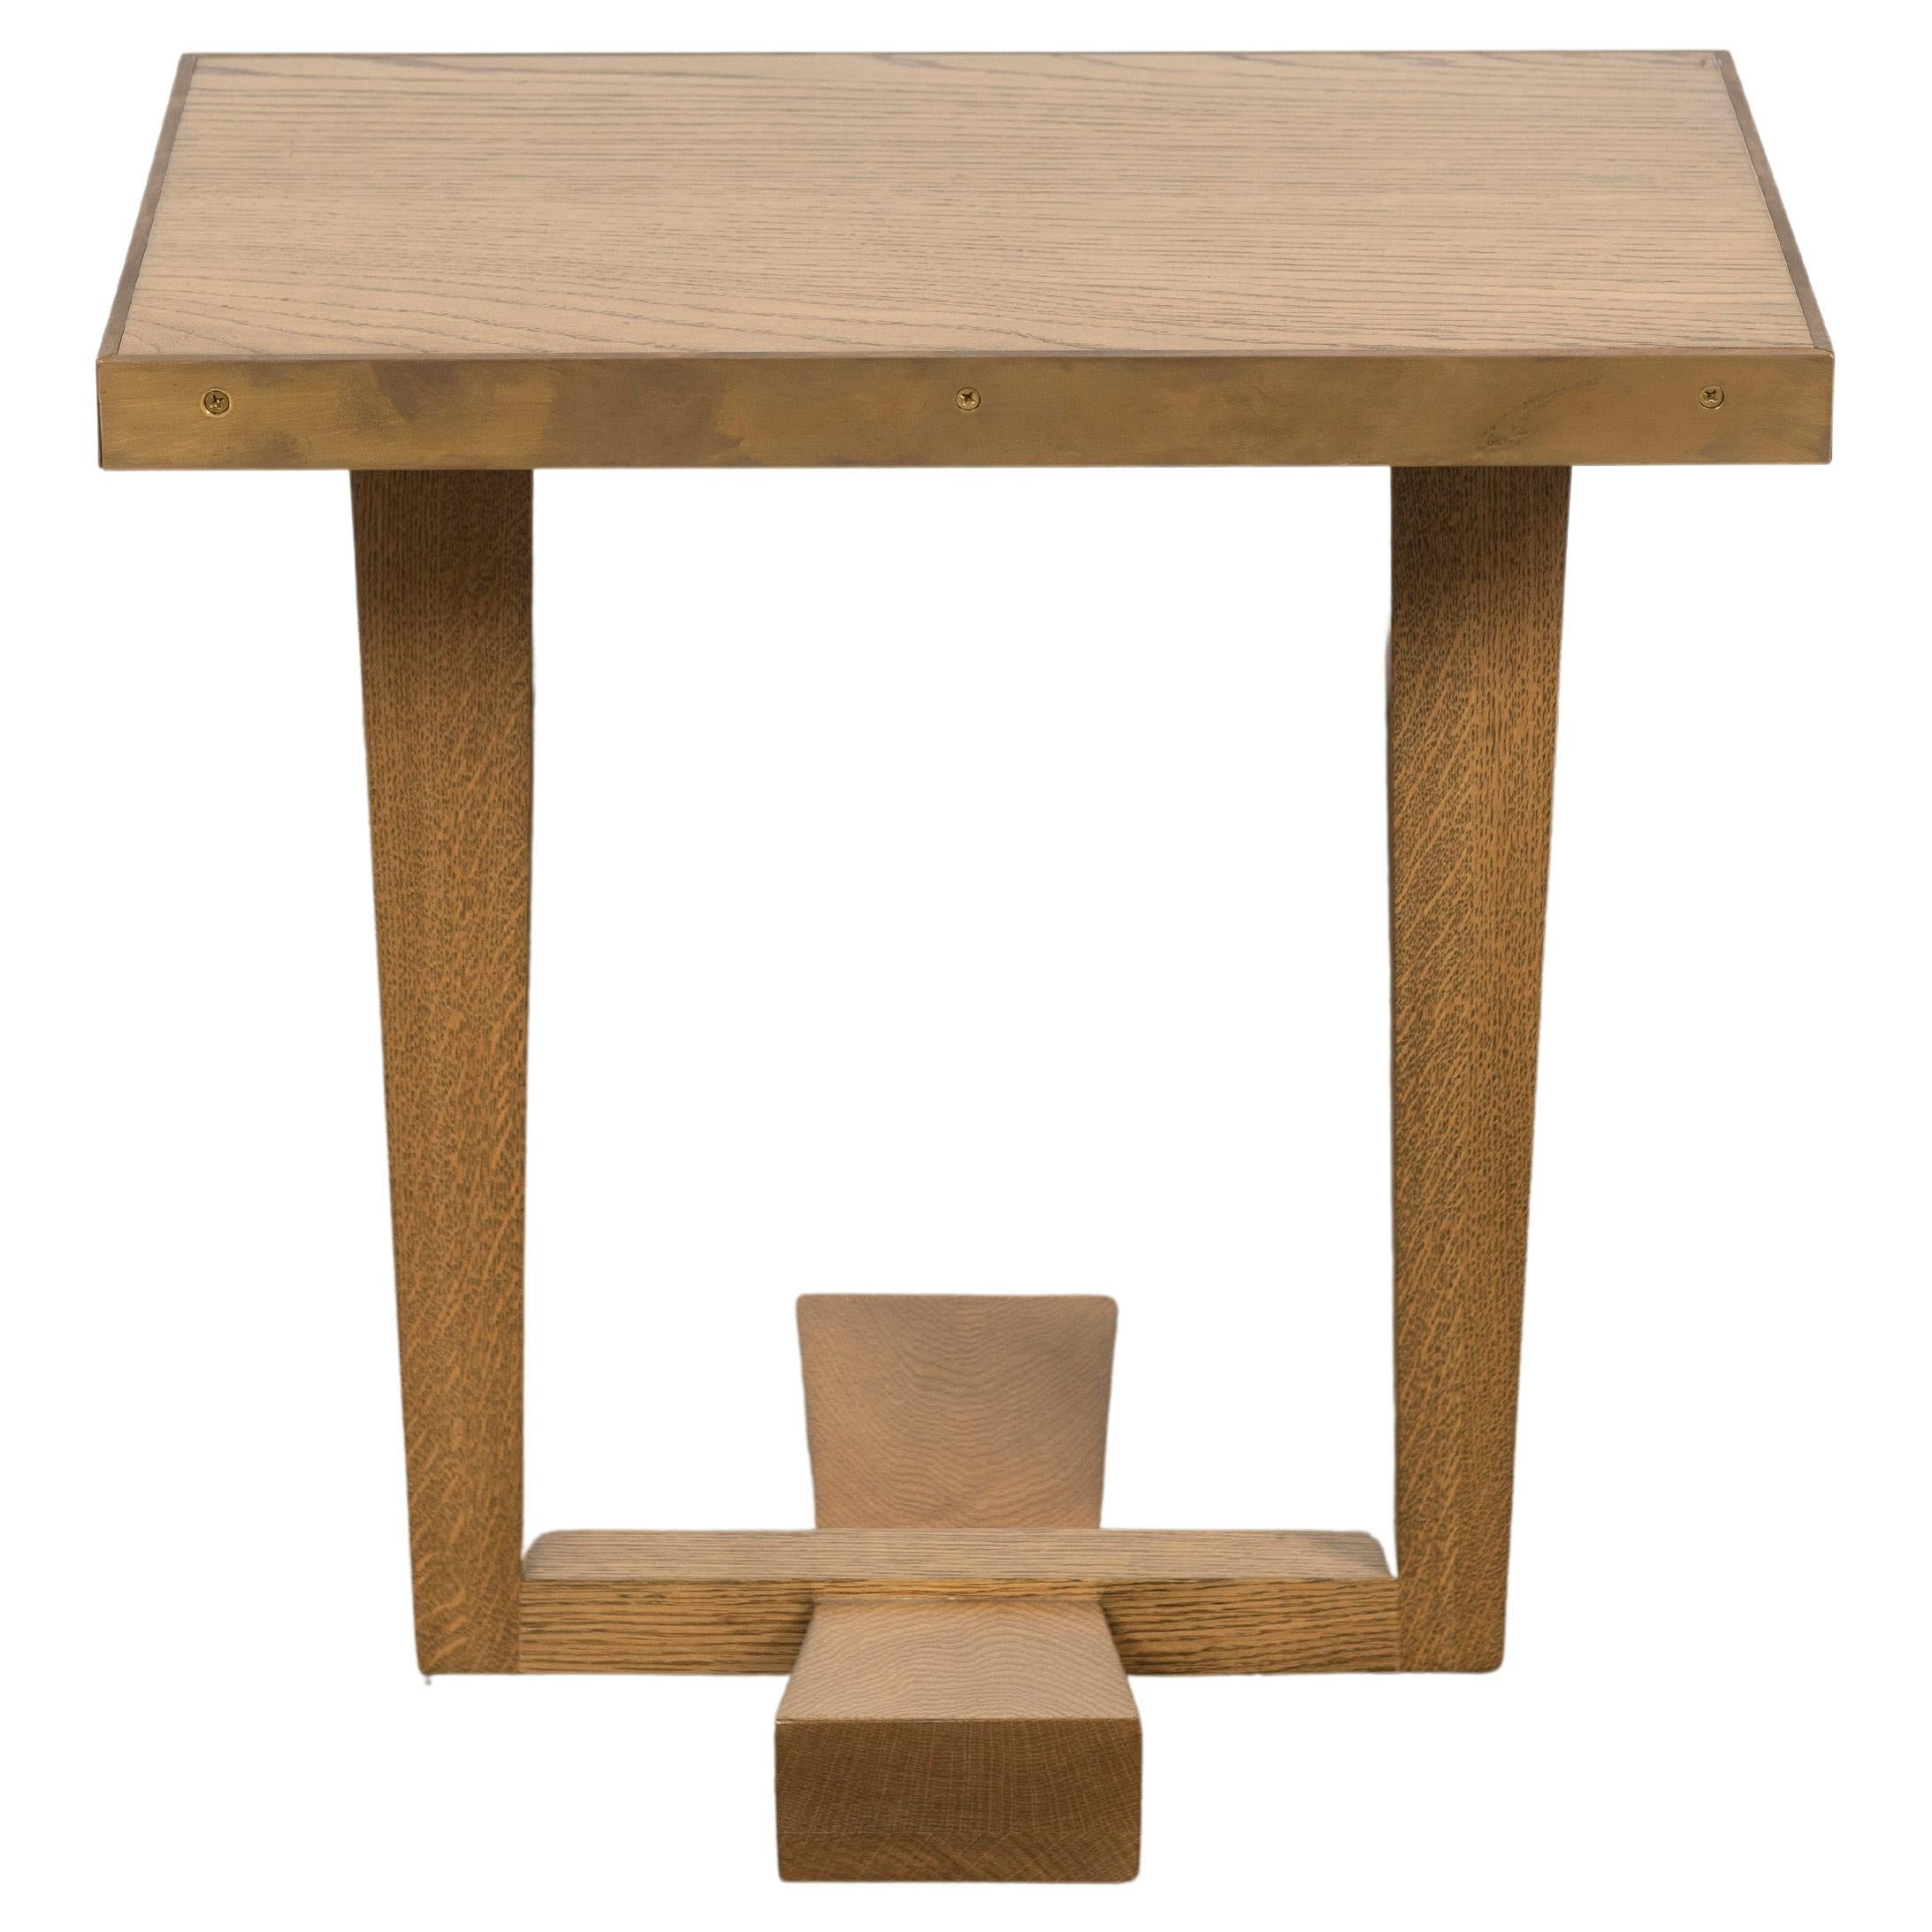 Rialto Side Table in Smoked Oak with Lacquered Brass Trimming